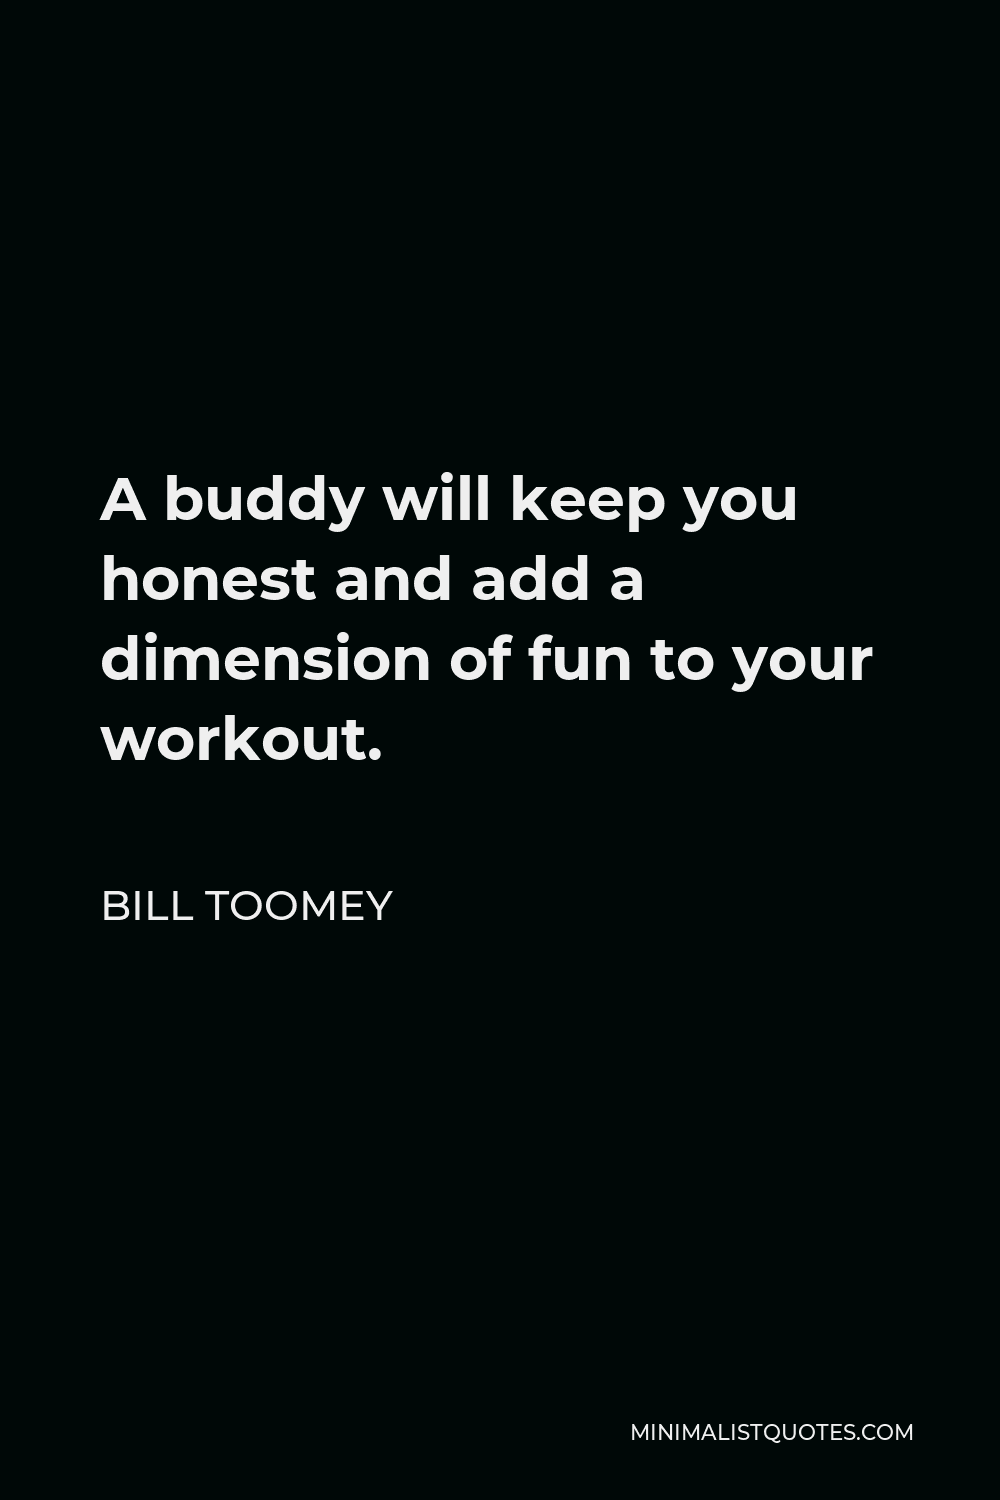 Bill Toomey Quote - A buddy will keep you honest and add a dimension of fun to your workout.